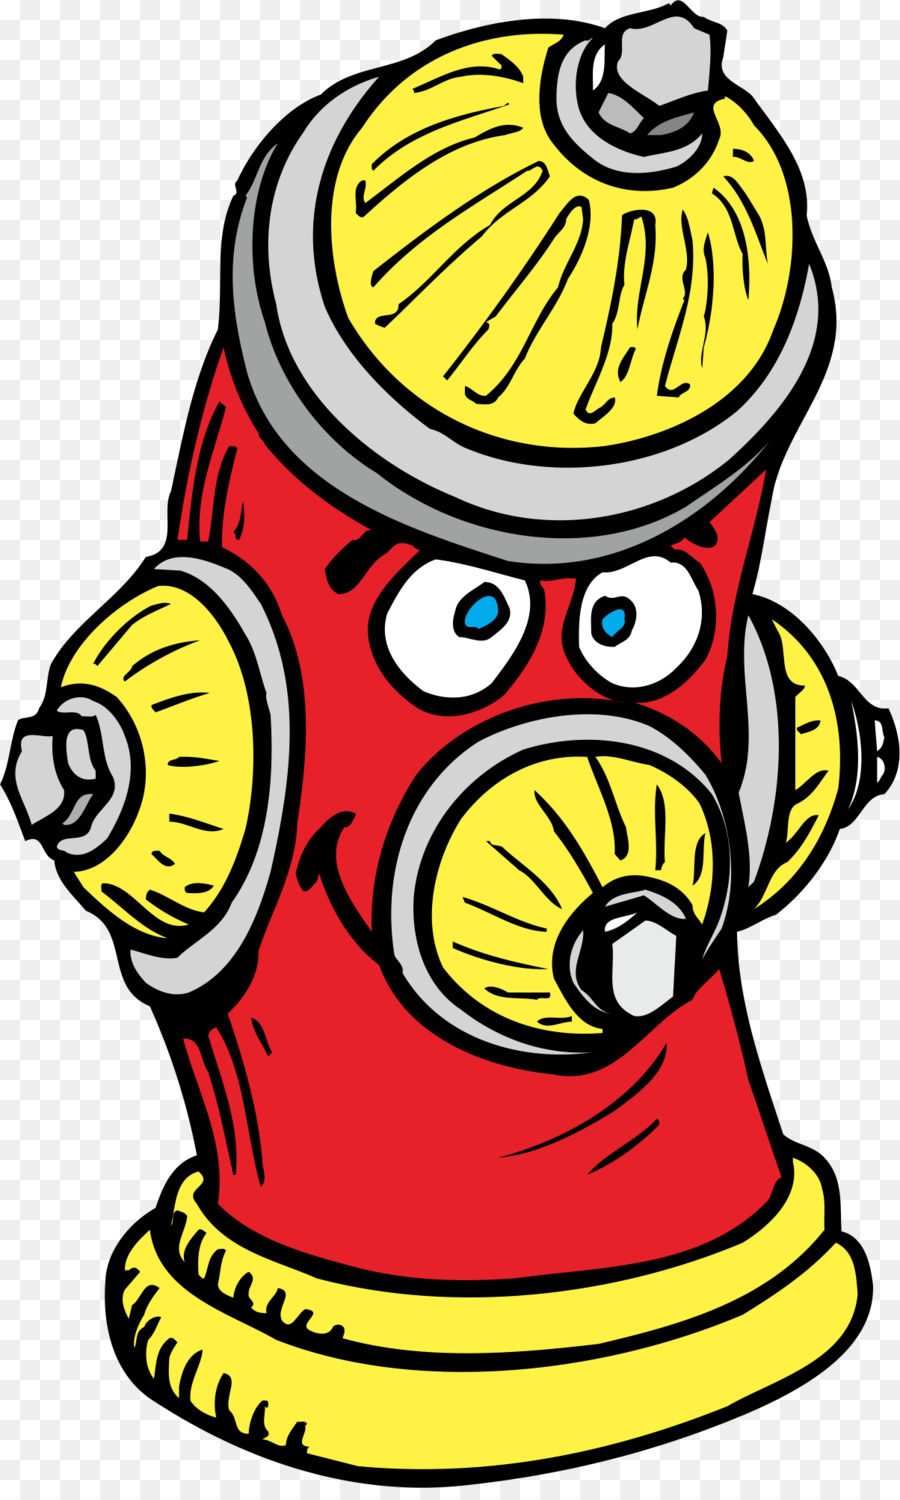 Fire Extinguisher Clipart png is about is about Fire Hydrant, Fire Safety, ...